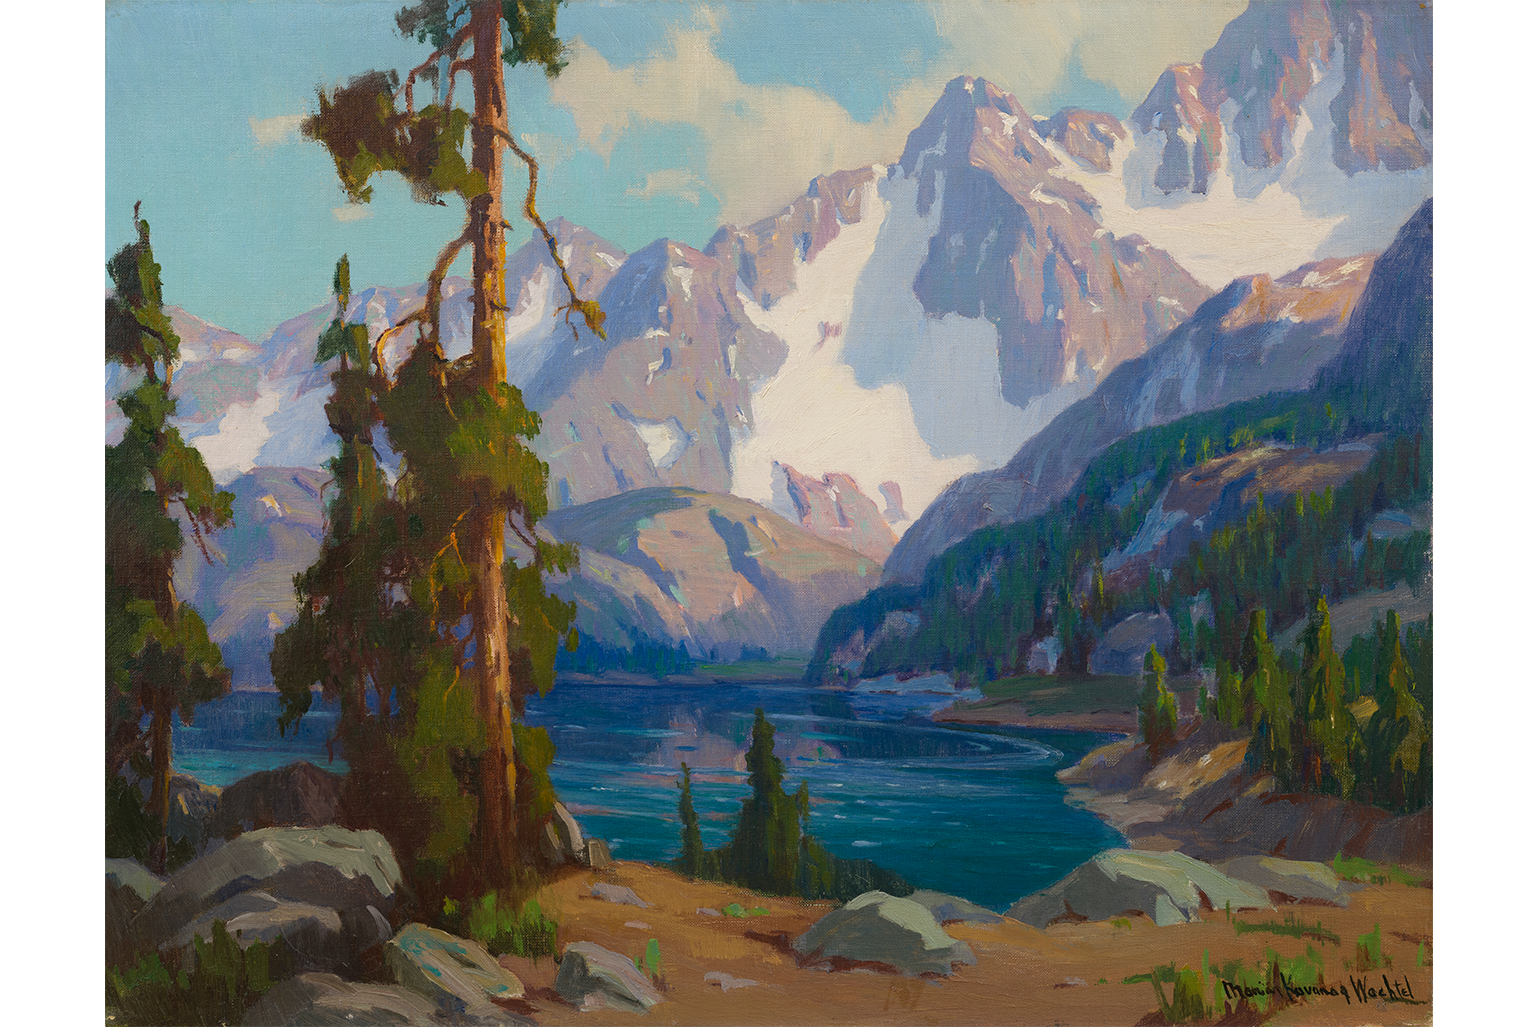 Marion Kavanagh Wachtel, Long Lake, Sierra Nevada, circa 1929, Oil on canvas, 20 x 26 in. UCI Jack and Shanaz Langson Institute and Museum of California Art, Gift of The Irvine Museum